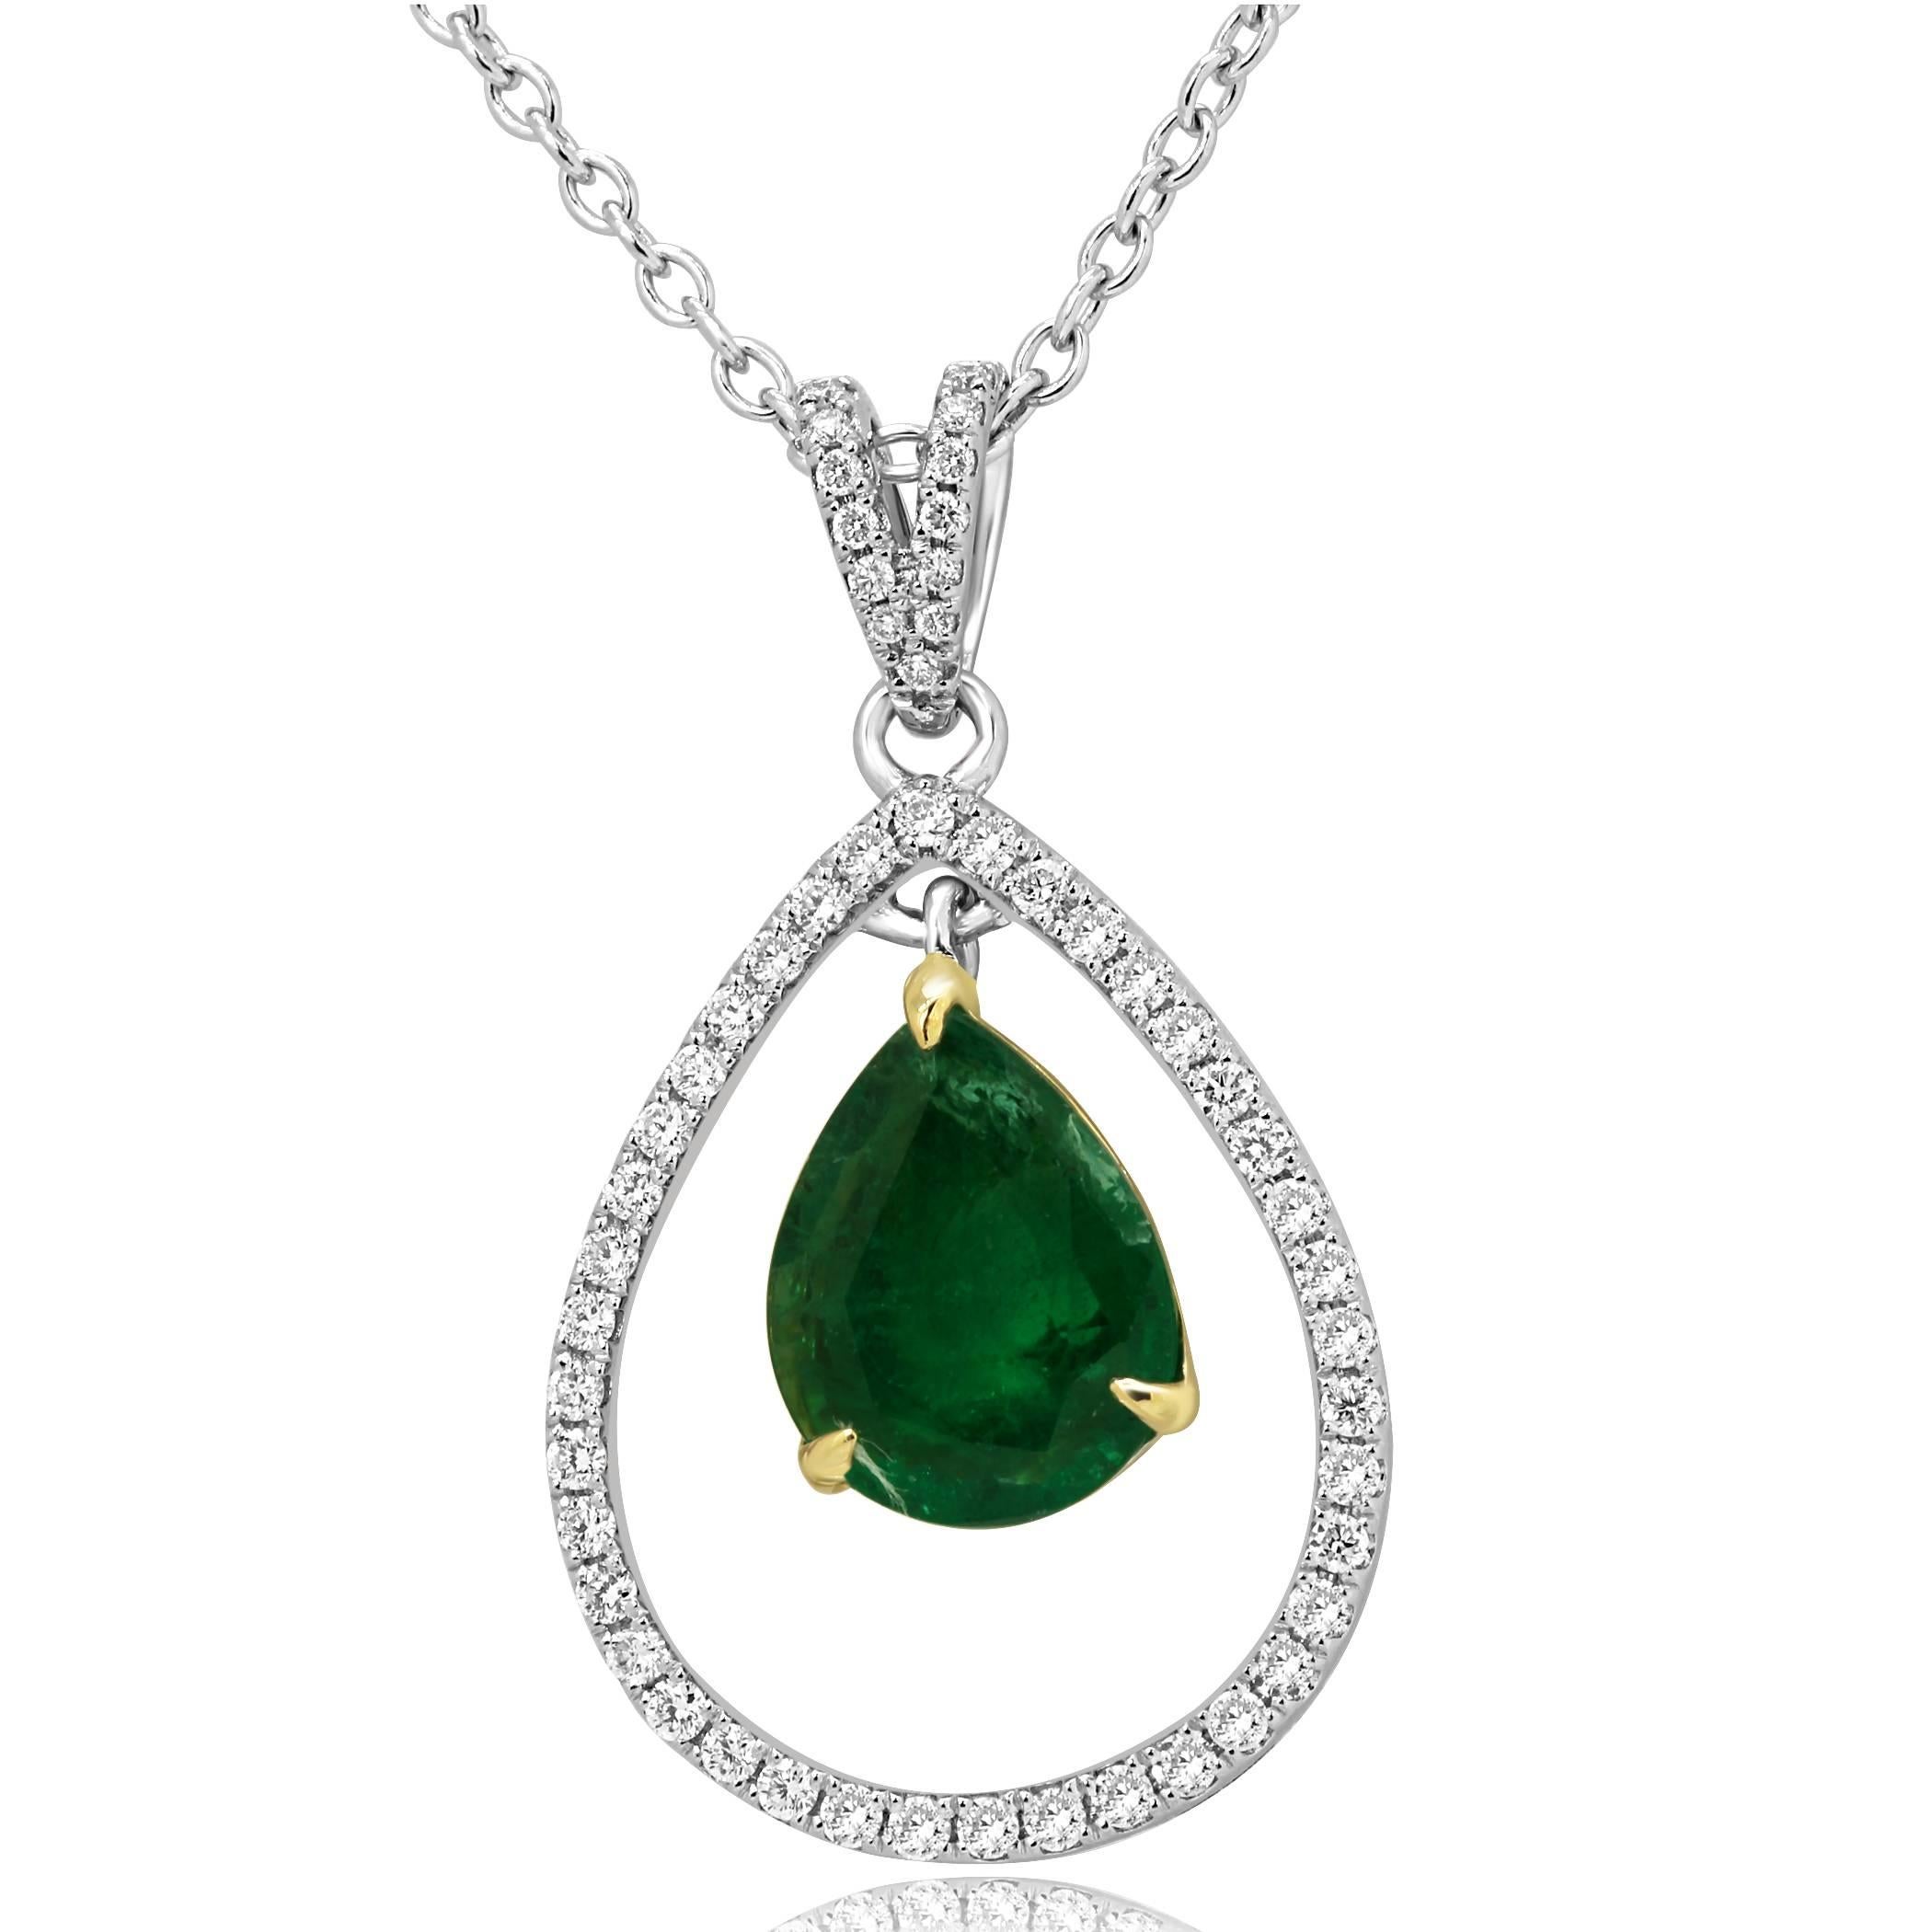 Stunning Emerald Pear shape 1.75 Carat encircled in a halo of White Round Diamonds 0.40 Carat in 14K White and Yellow Gold Chain Necklace.

Style available in different price ranges. Prices are based on your selection of 4C's i.e Cut, Color, Carat,